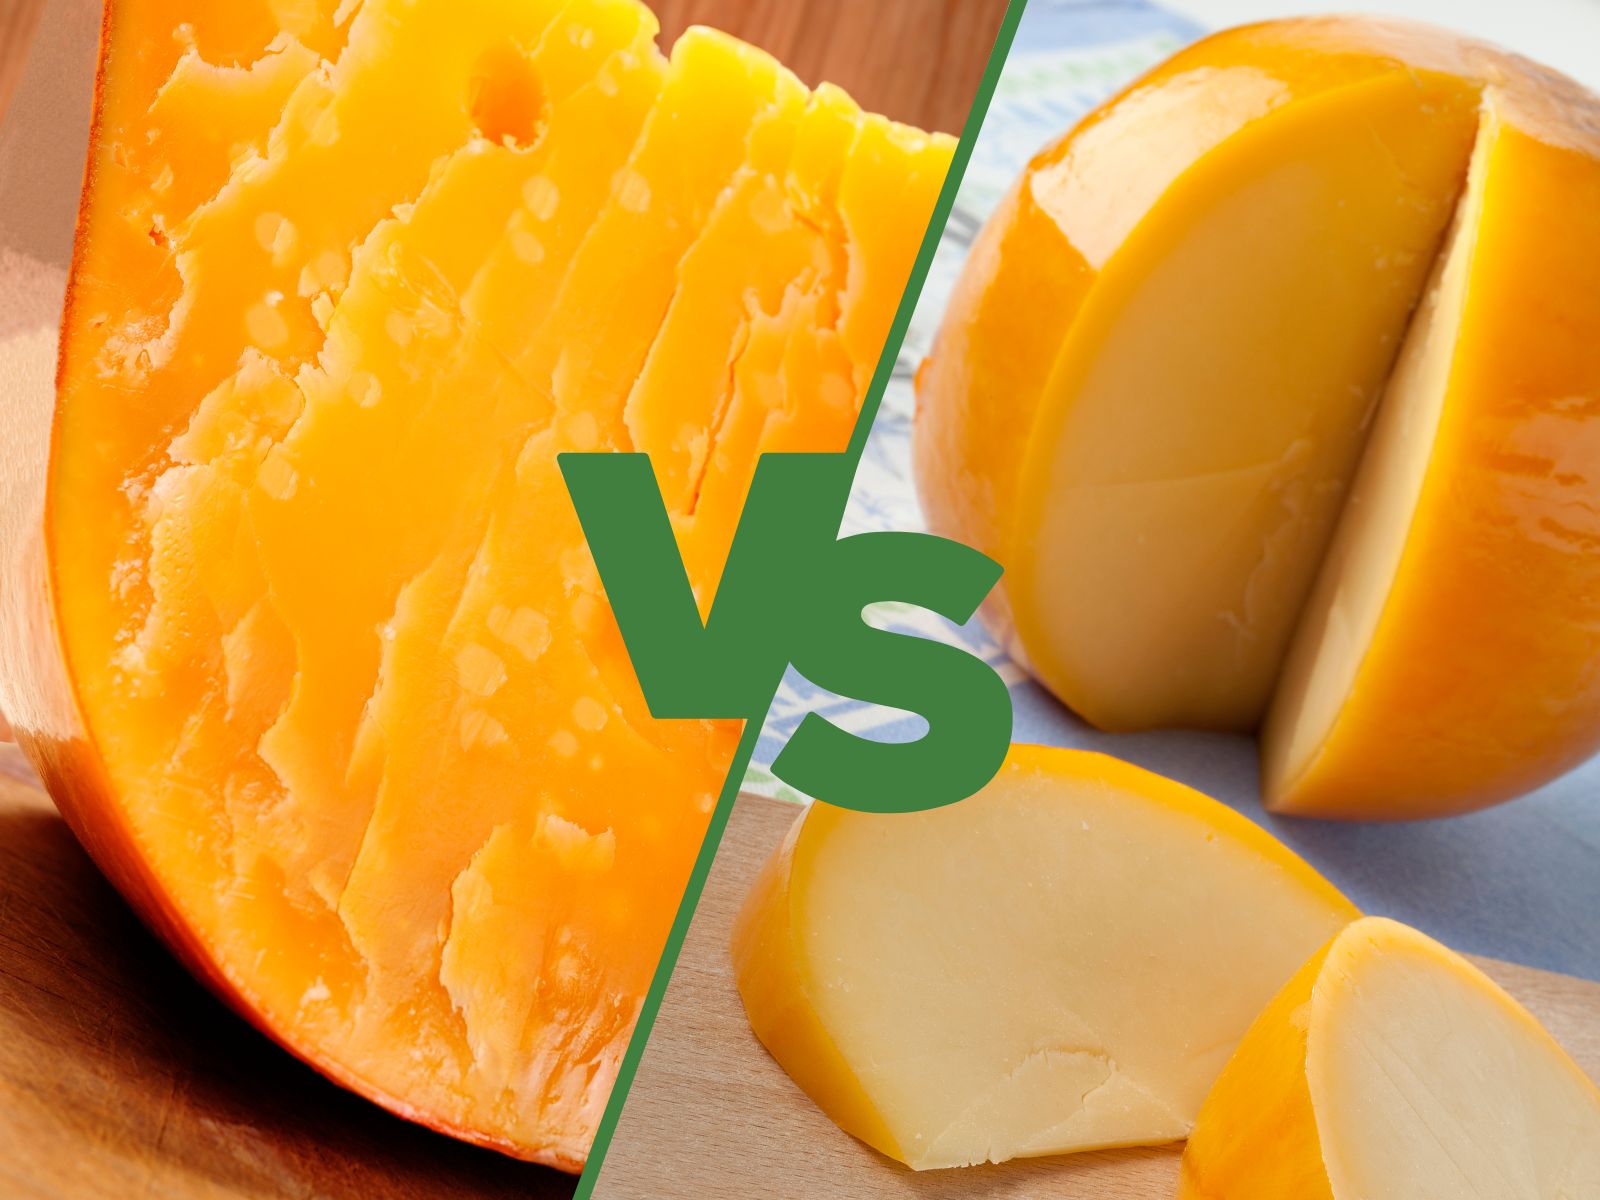 Gouda Vs. Cheddar What's The Difference?